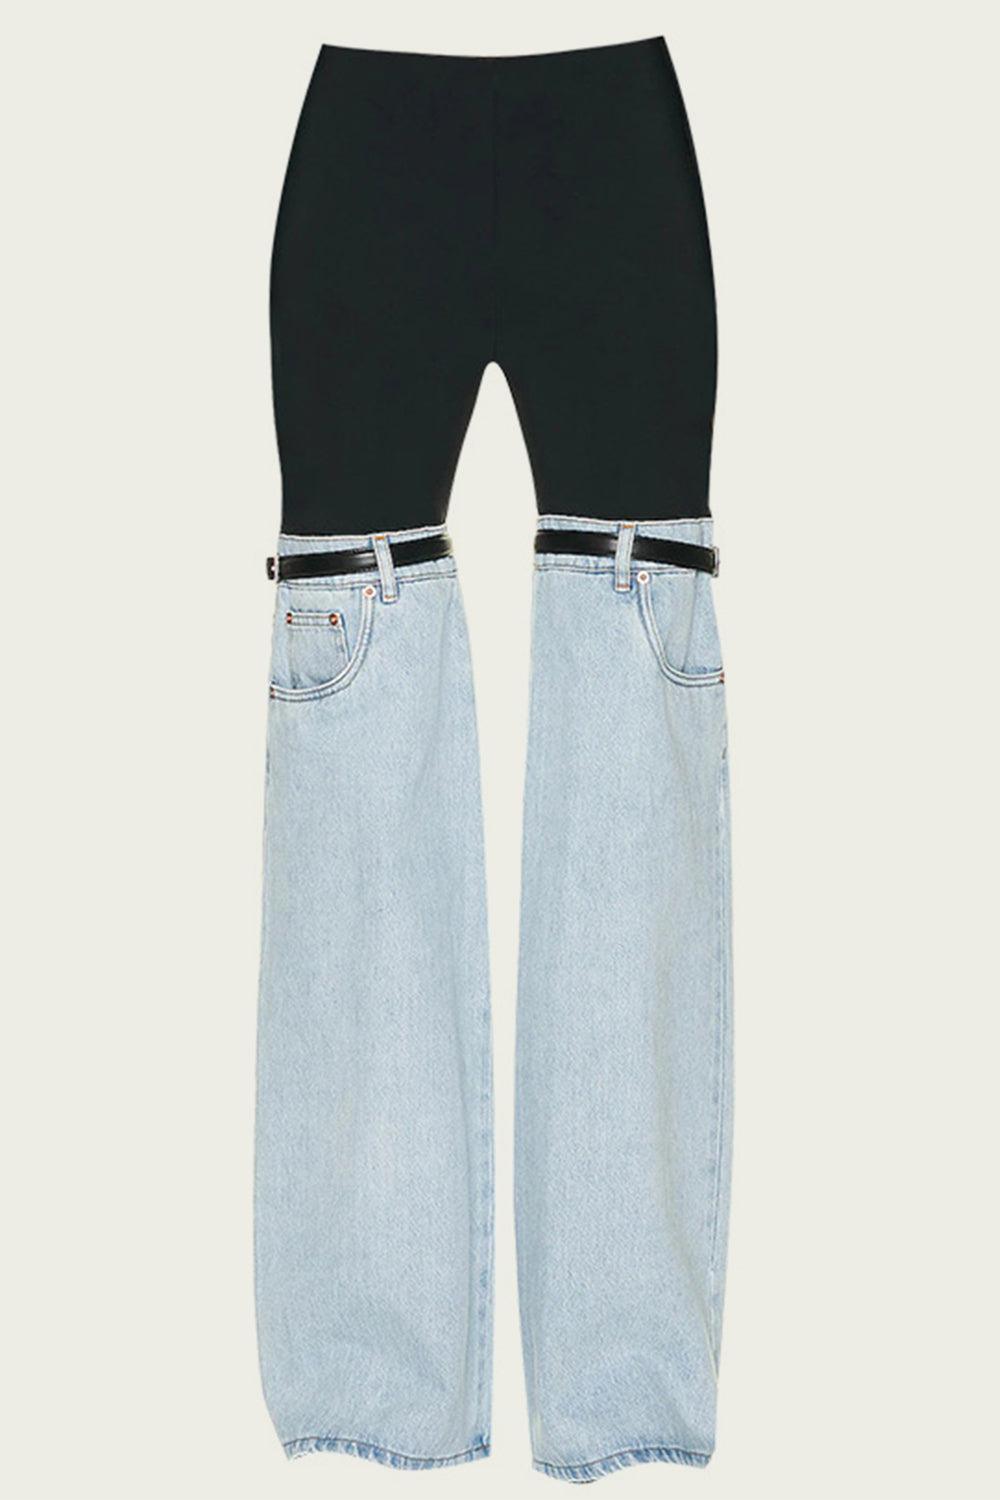 a pair of blue jeans with a black belt